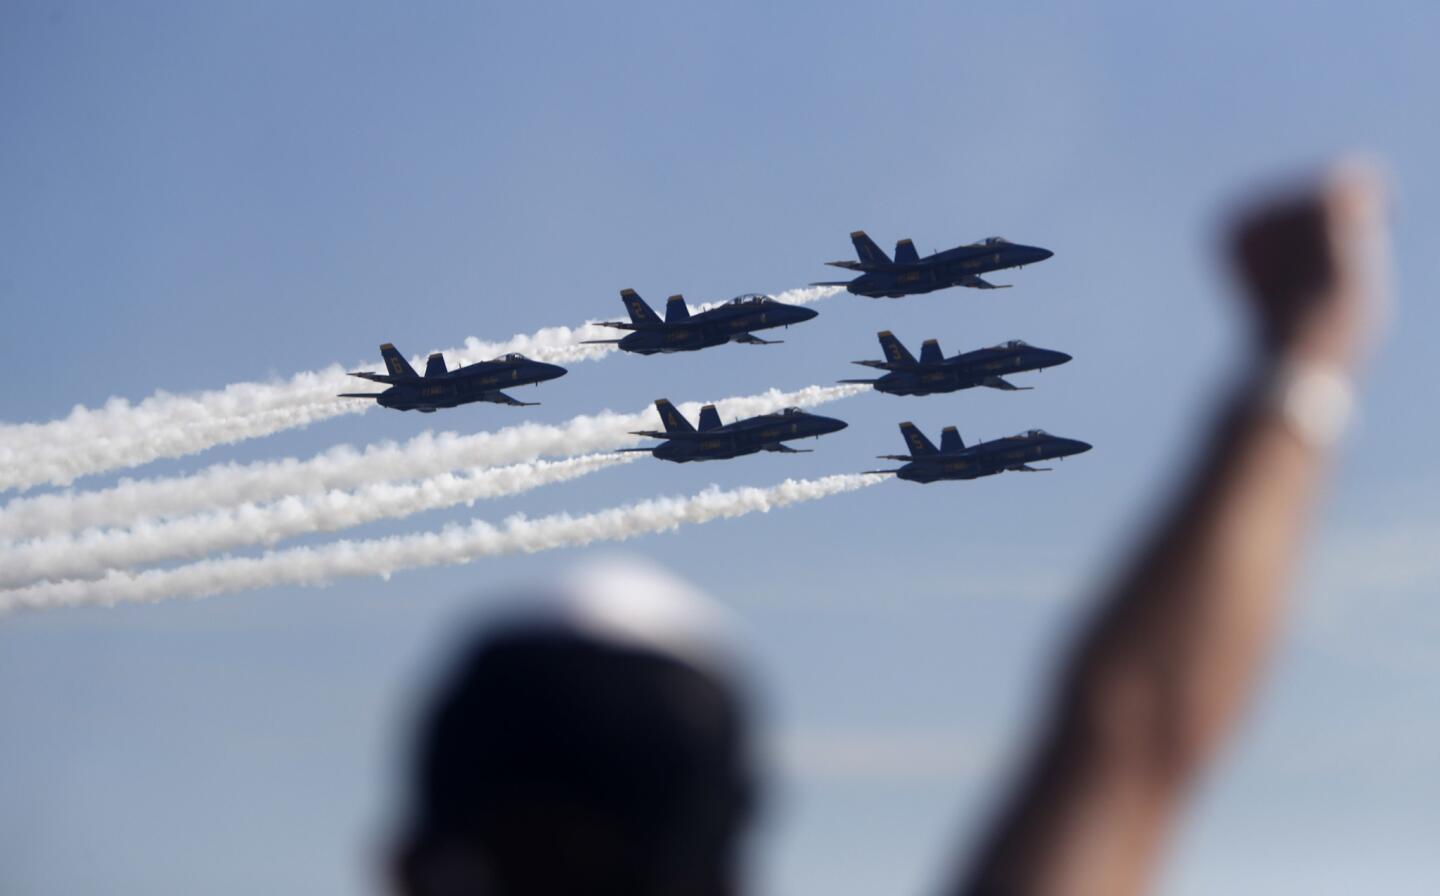 Paul Codorniz, 72 of Tulare, Ca., came for his birthday and saluted the U.S. Navy Blue Angels as they gave one last pass at the second annual Breitling Huntington Beach Airshow, in Huntington Beach, on Saturday, Sept. 30, 2017.